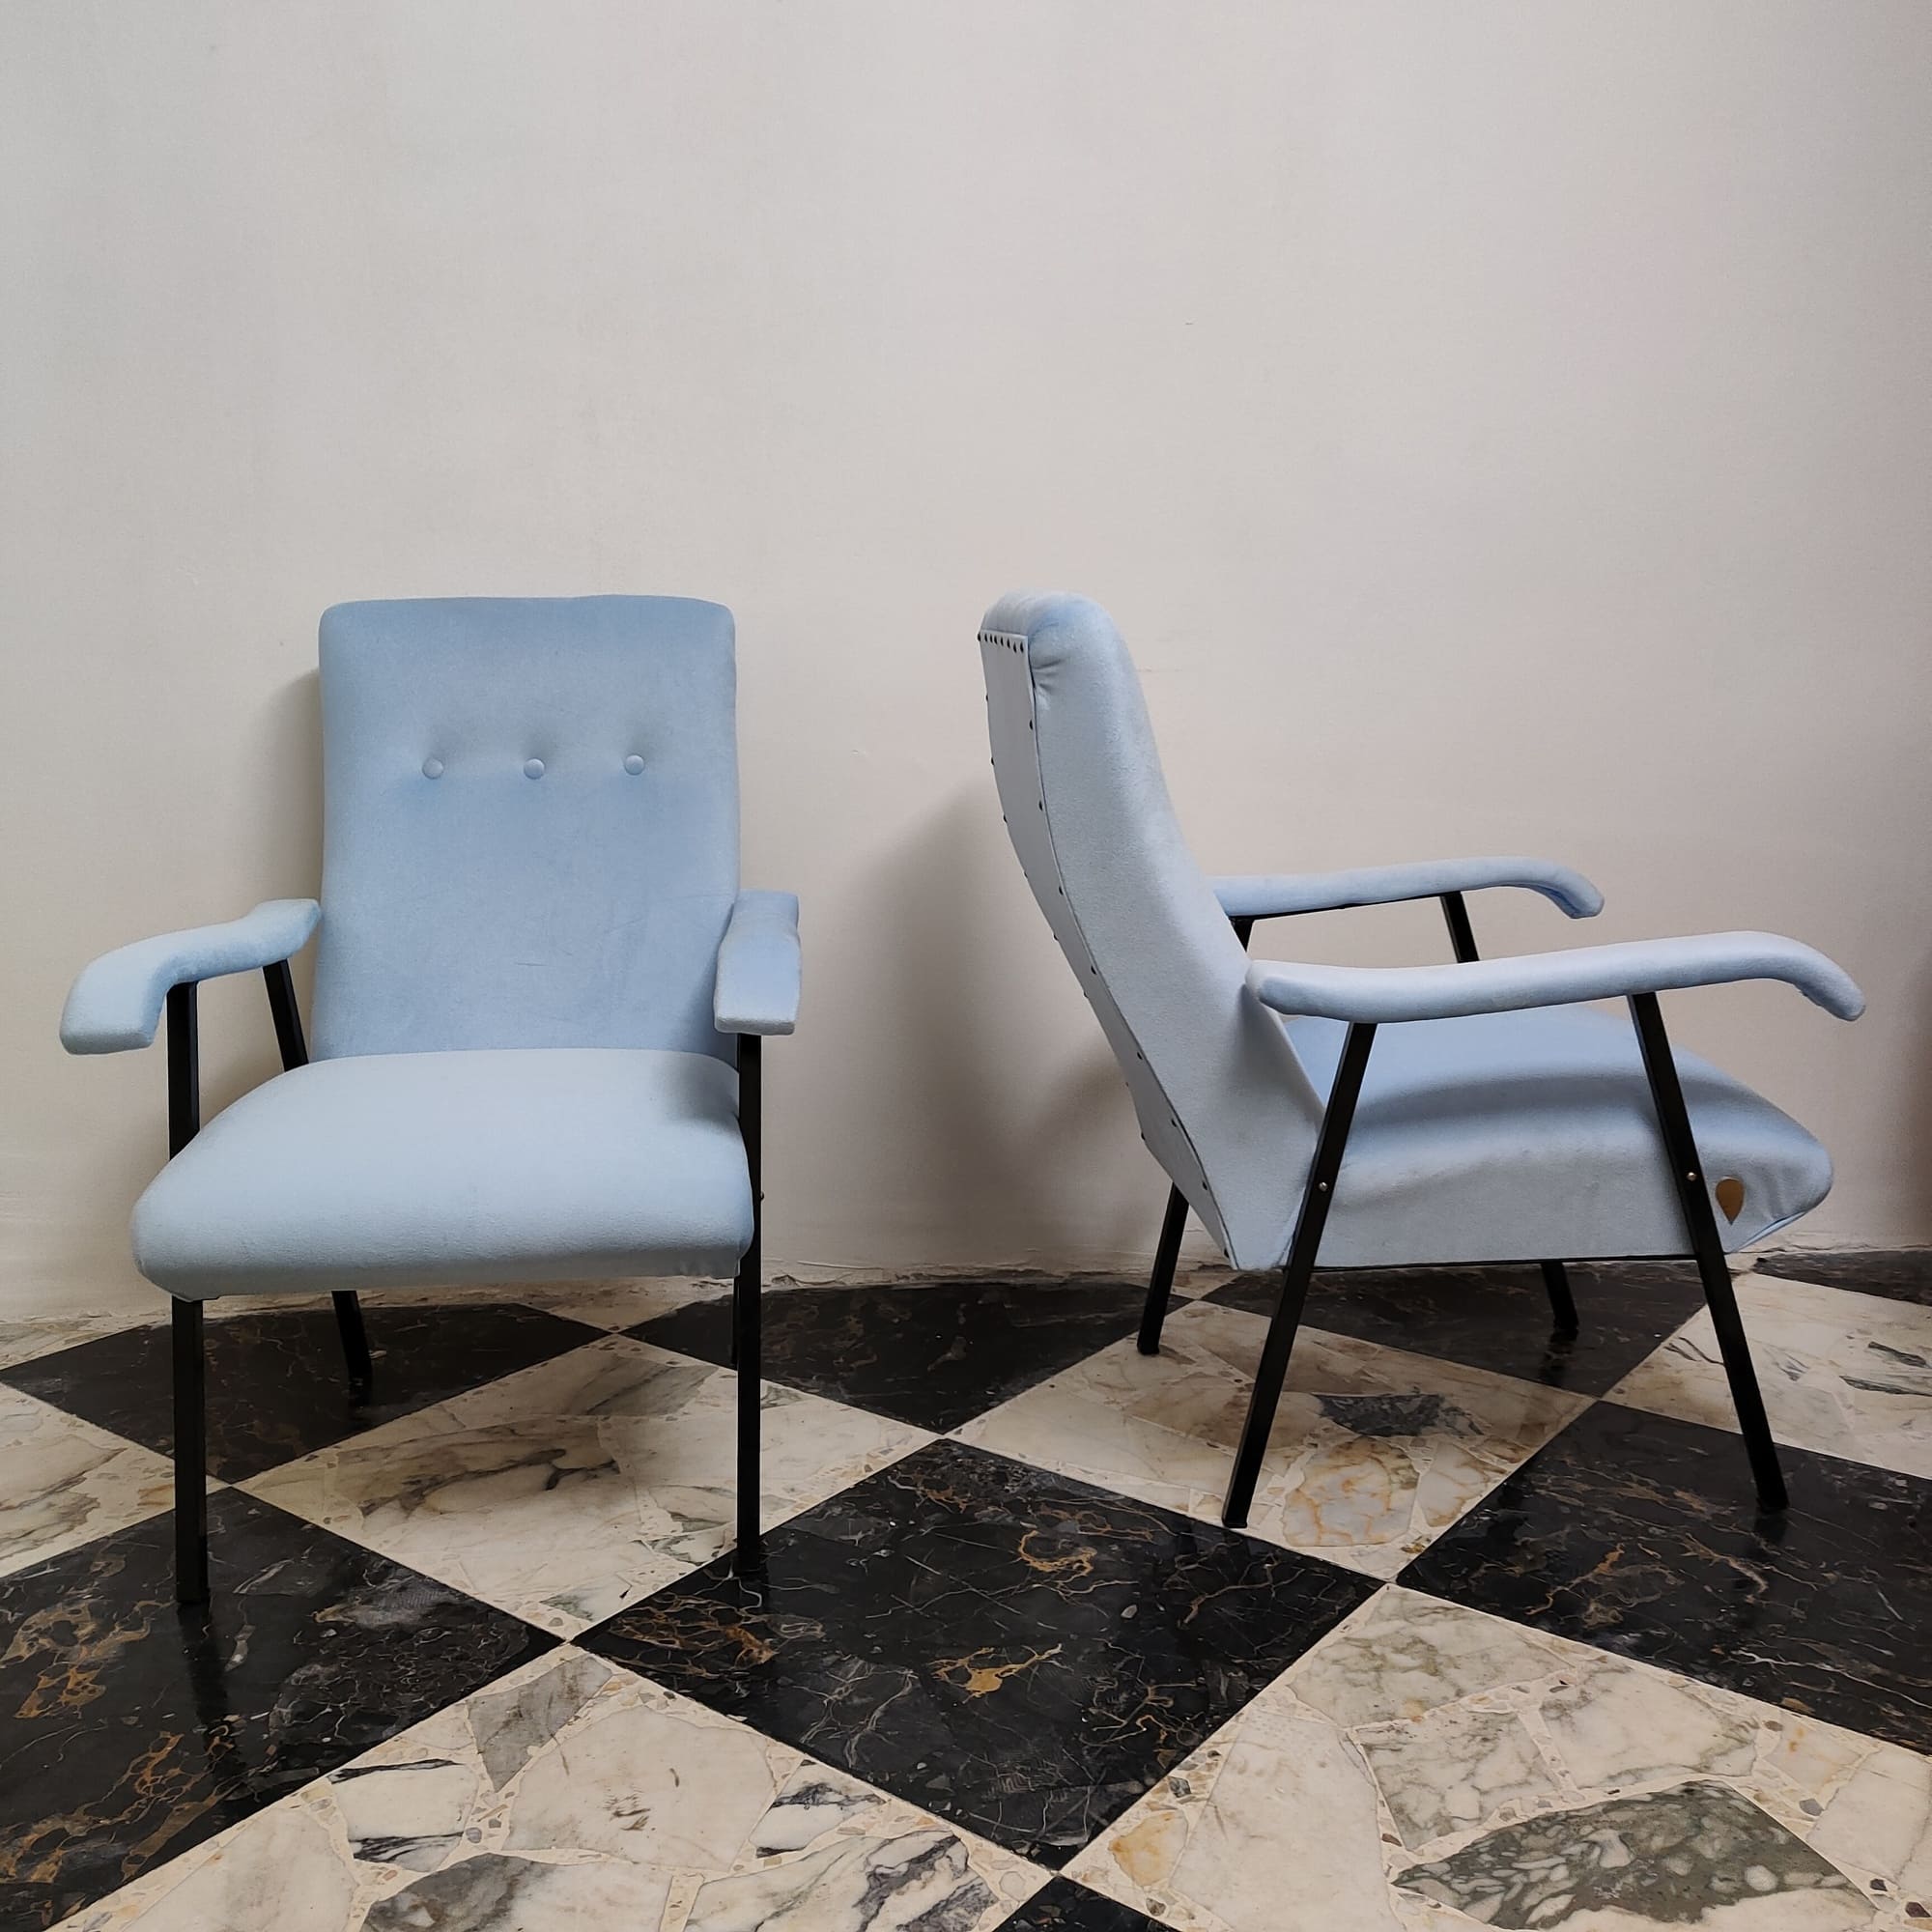 visionidepoca-pair-of-60s-70s-armchairs-upholstered-in blue-and-black-feet-with-brass-inserts-1